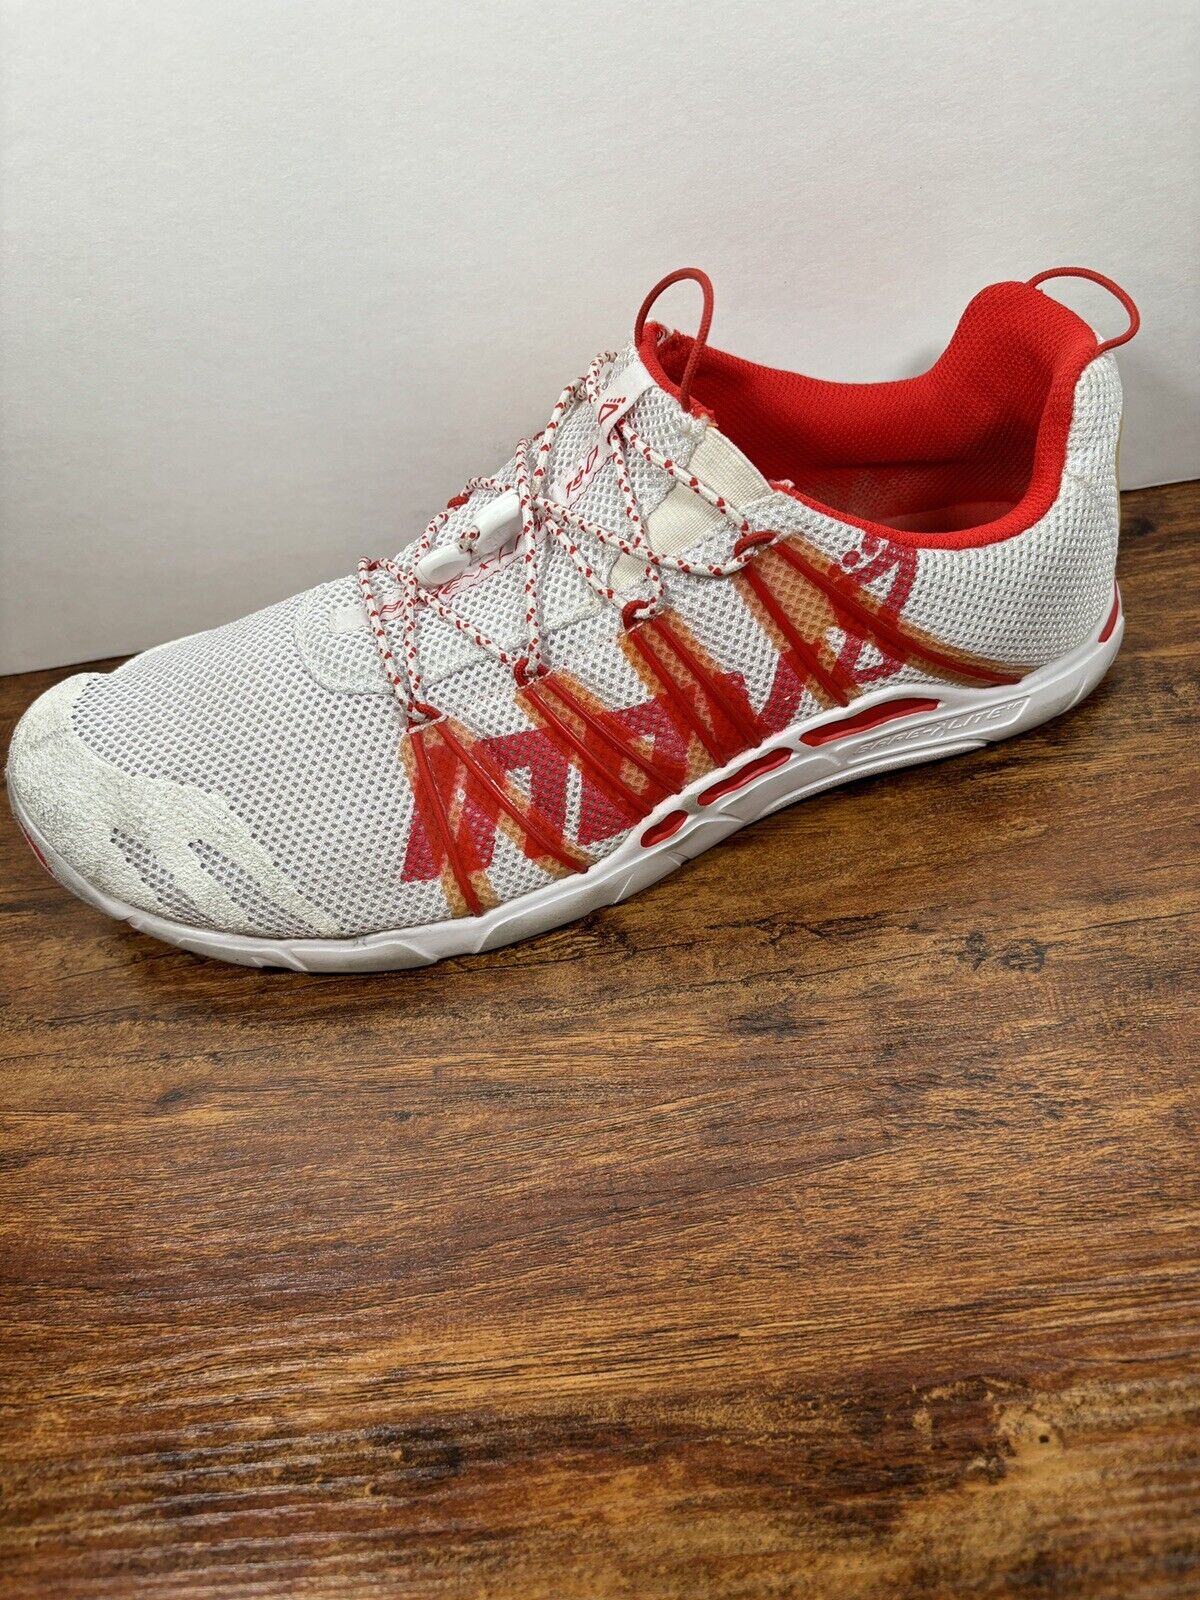 inov-8 Bare-X Lite 150 Running Shoes Sneakers White Red Mens Size 12 Drawstring